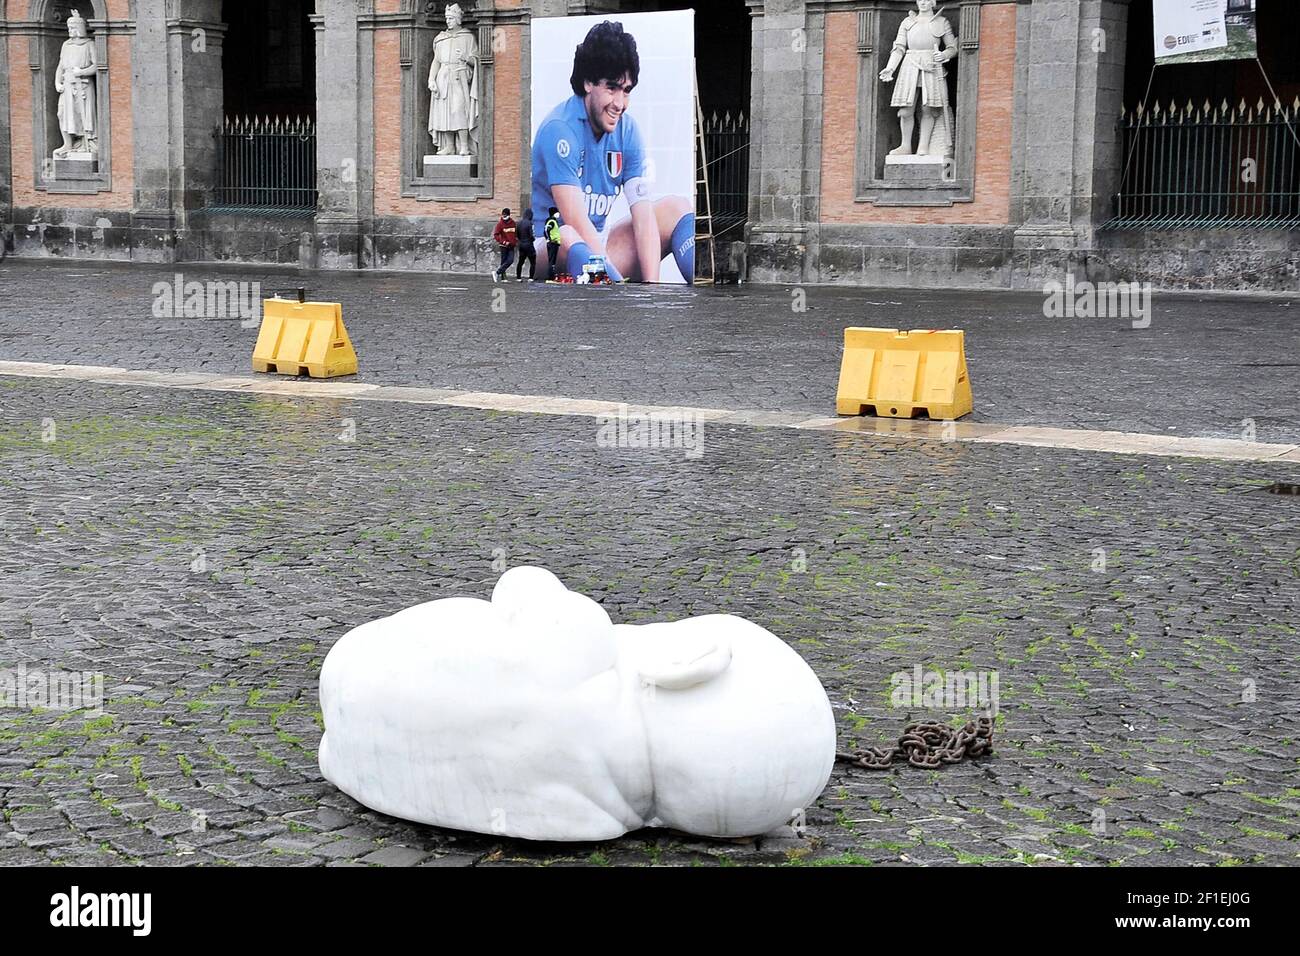 Giant photo by Diego Armando Maradano placed in Piazza Plebiscito, where the sculpture of the crouching child by the sculptor JAGO still stands. Italy Stock Photo